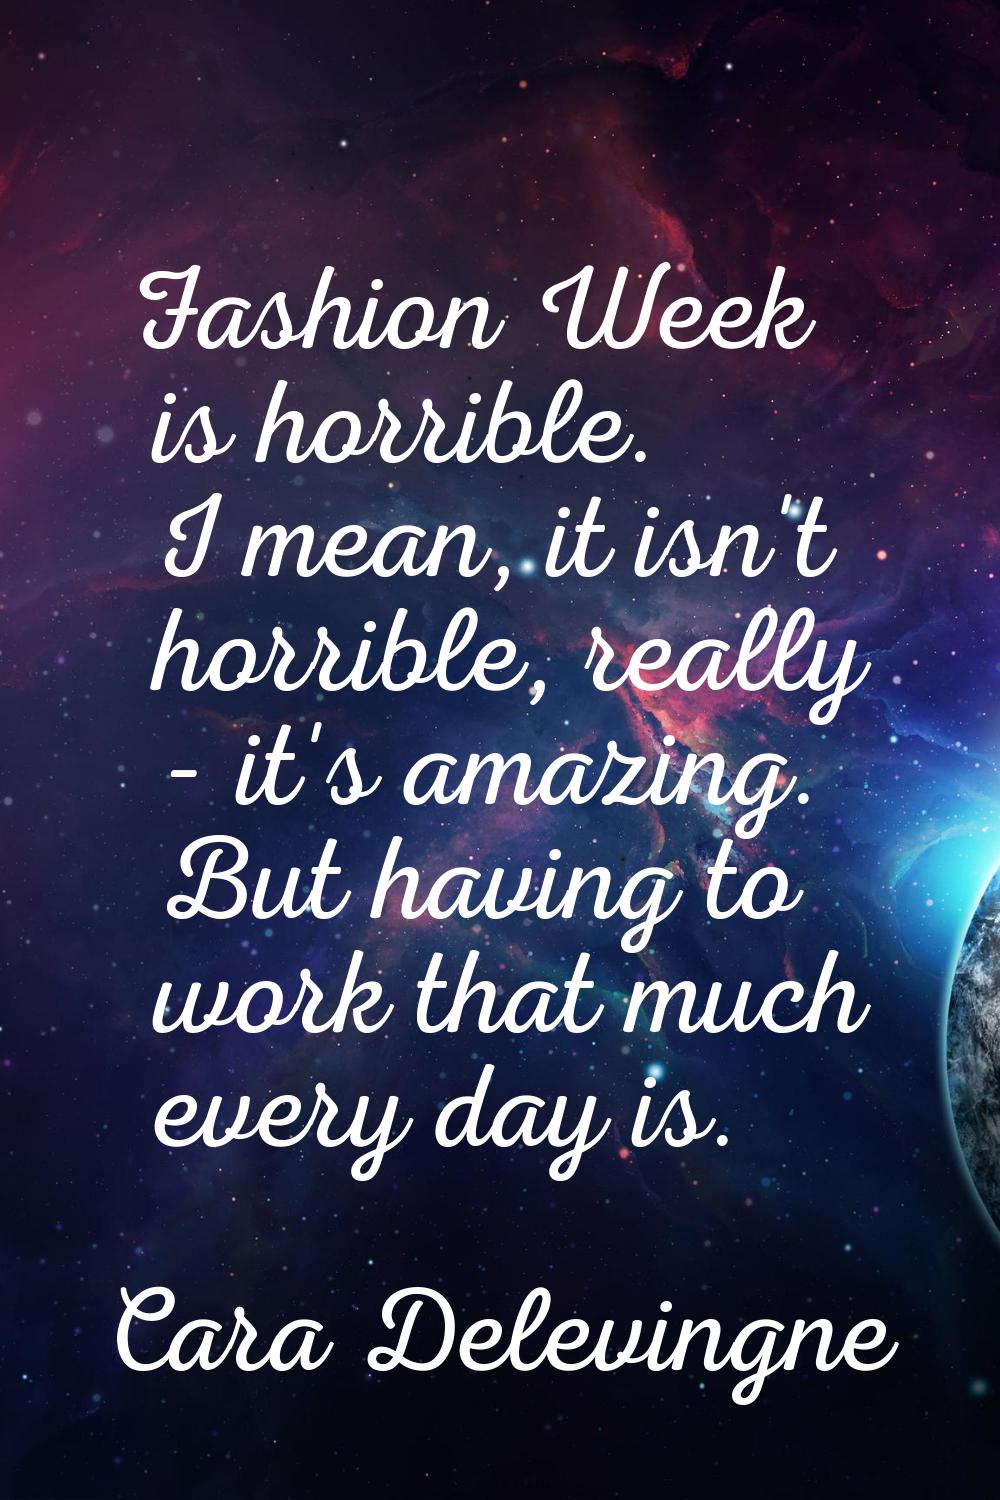 Fashion Week is horrible. I mean, it isn't horrible, really - it's amazing. But having to work that